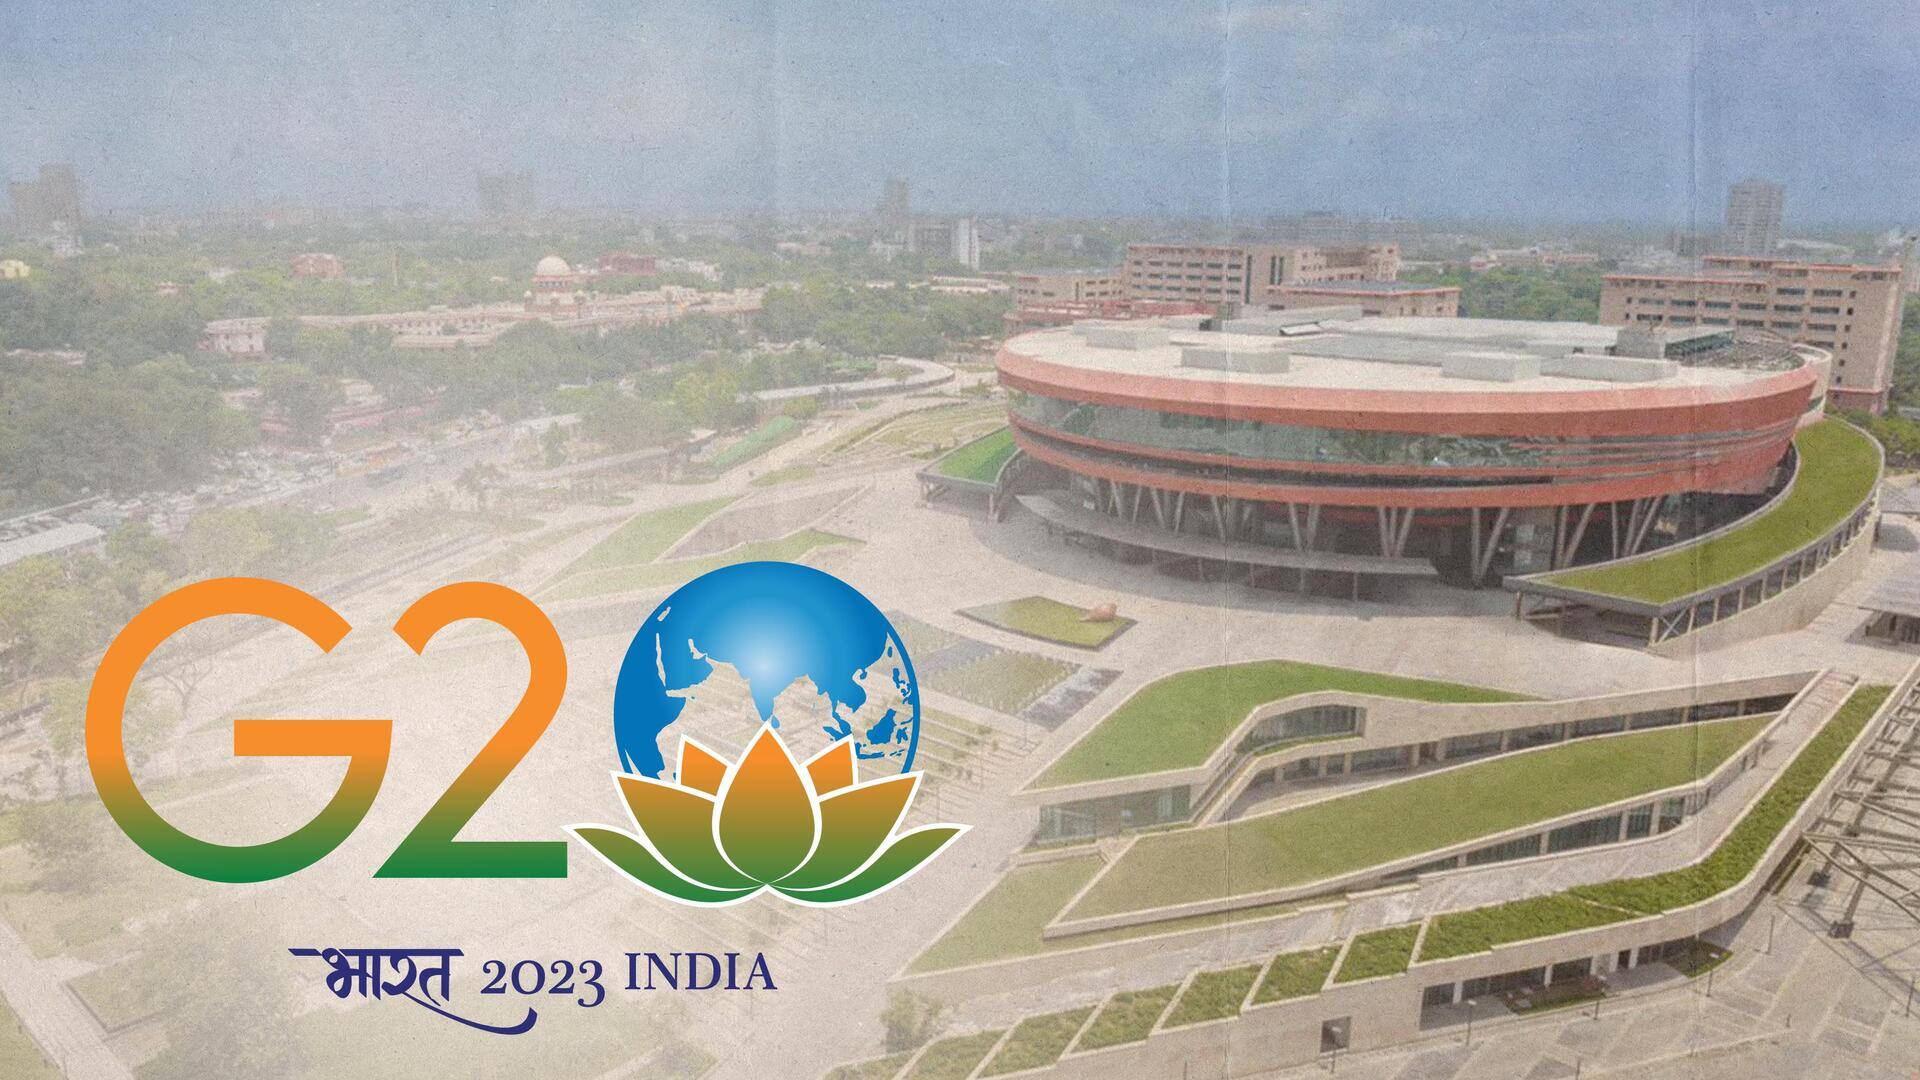 G20 preps: 35 hotels booked, cleanliness drive begins today